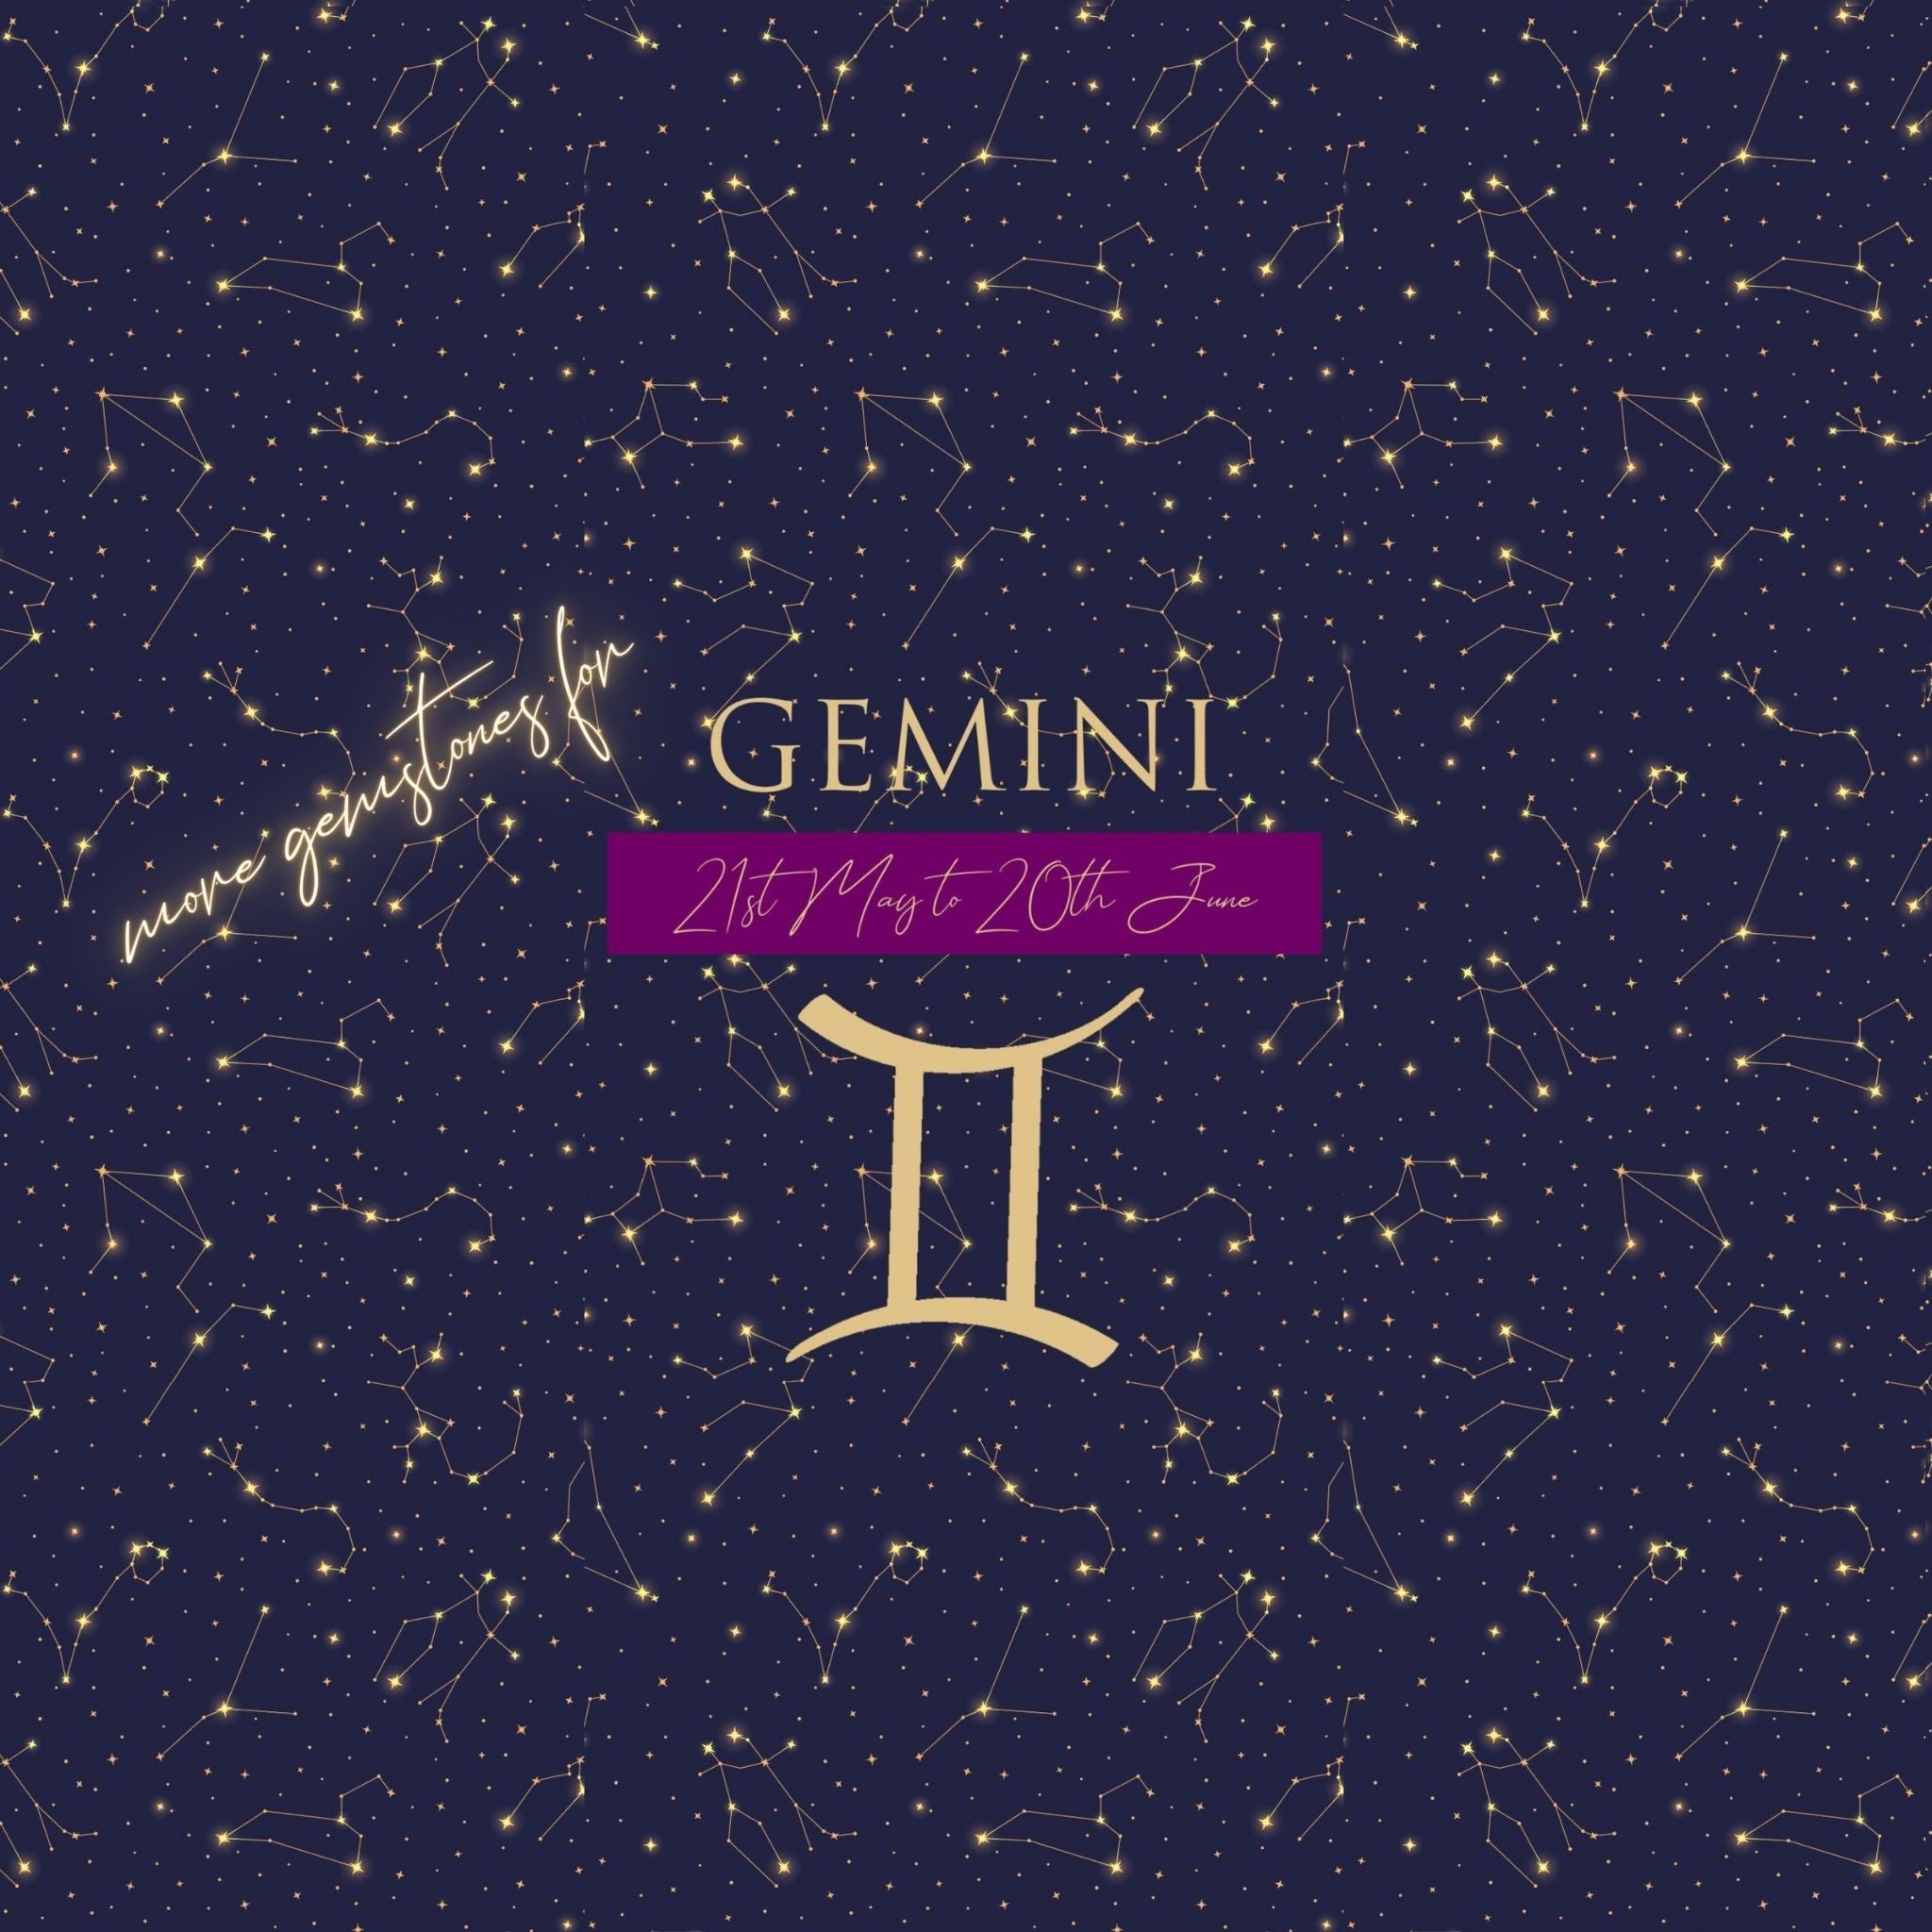 Gemini zodiac sign blog about gemstones astrologer recommended